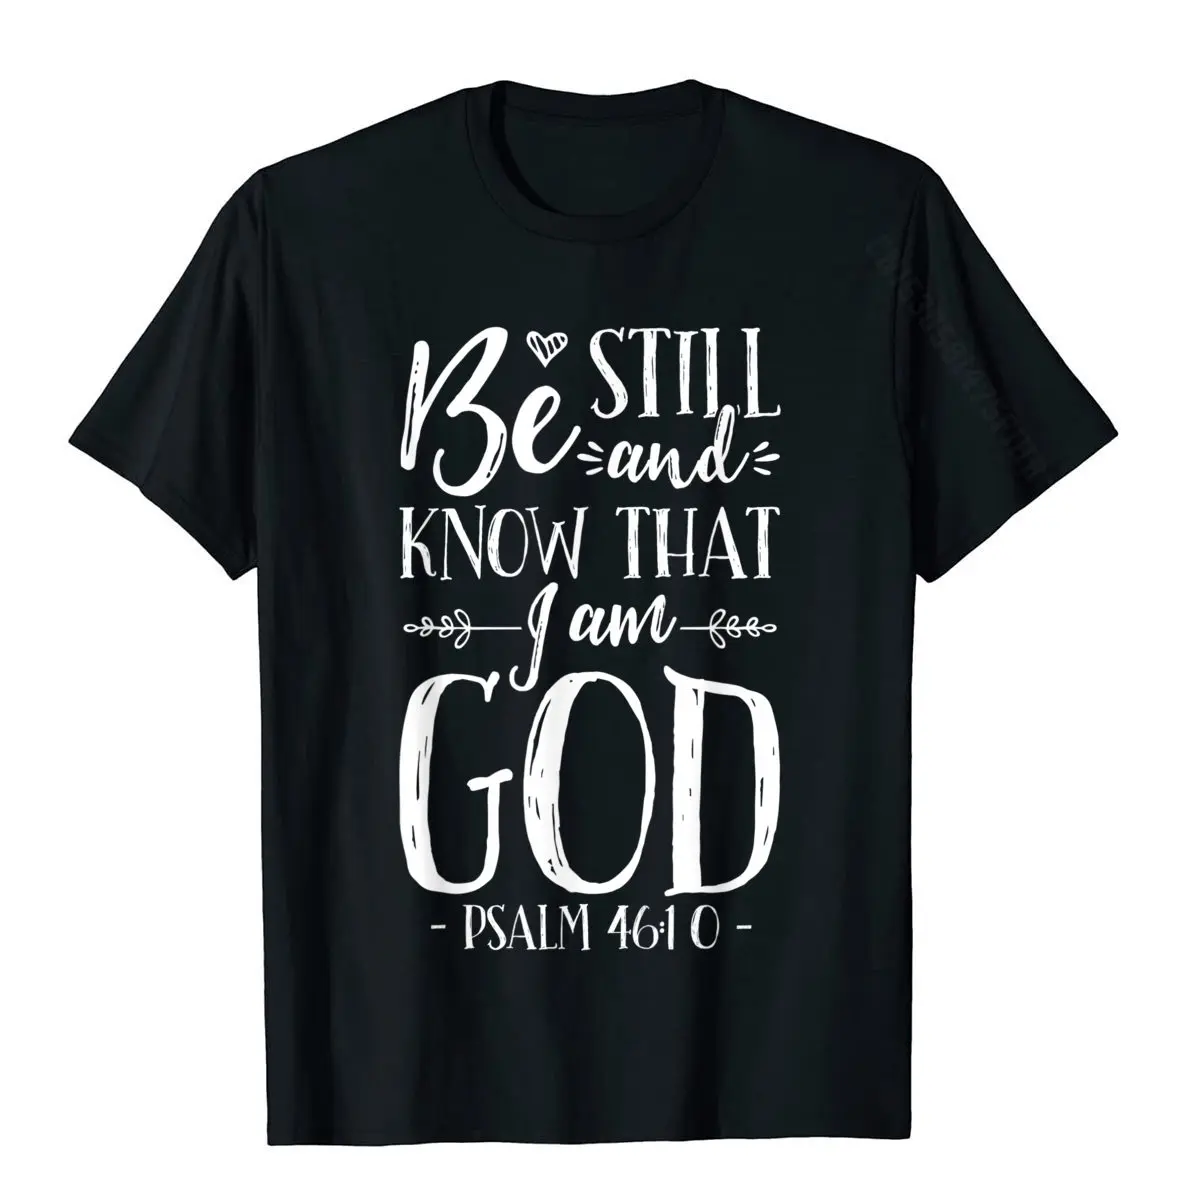 Be Still And Know That I Am God T Shirt Christian Jesus Tee T-Shirt Plain Men T Shirt Cotton Tees Casual